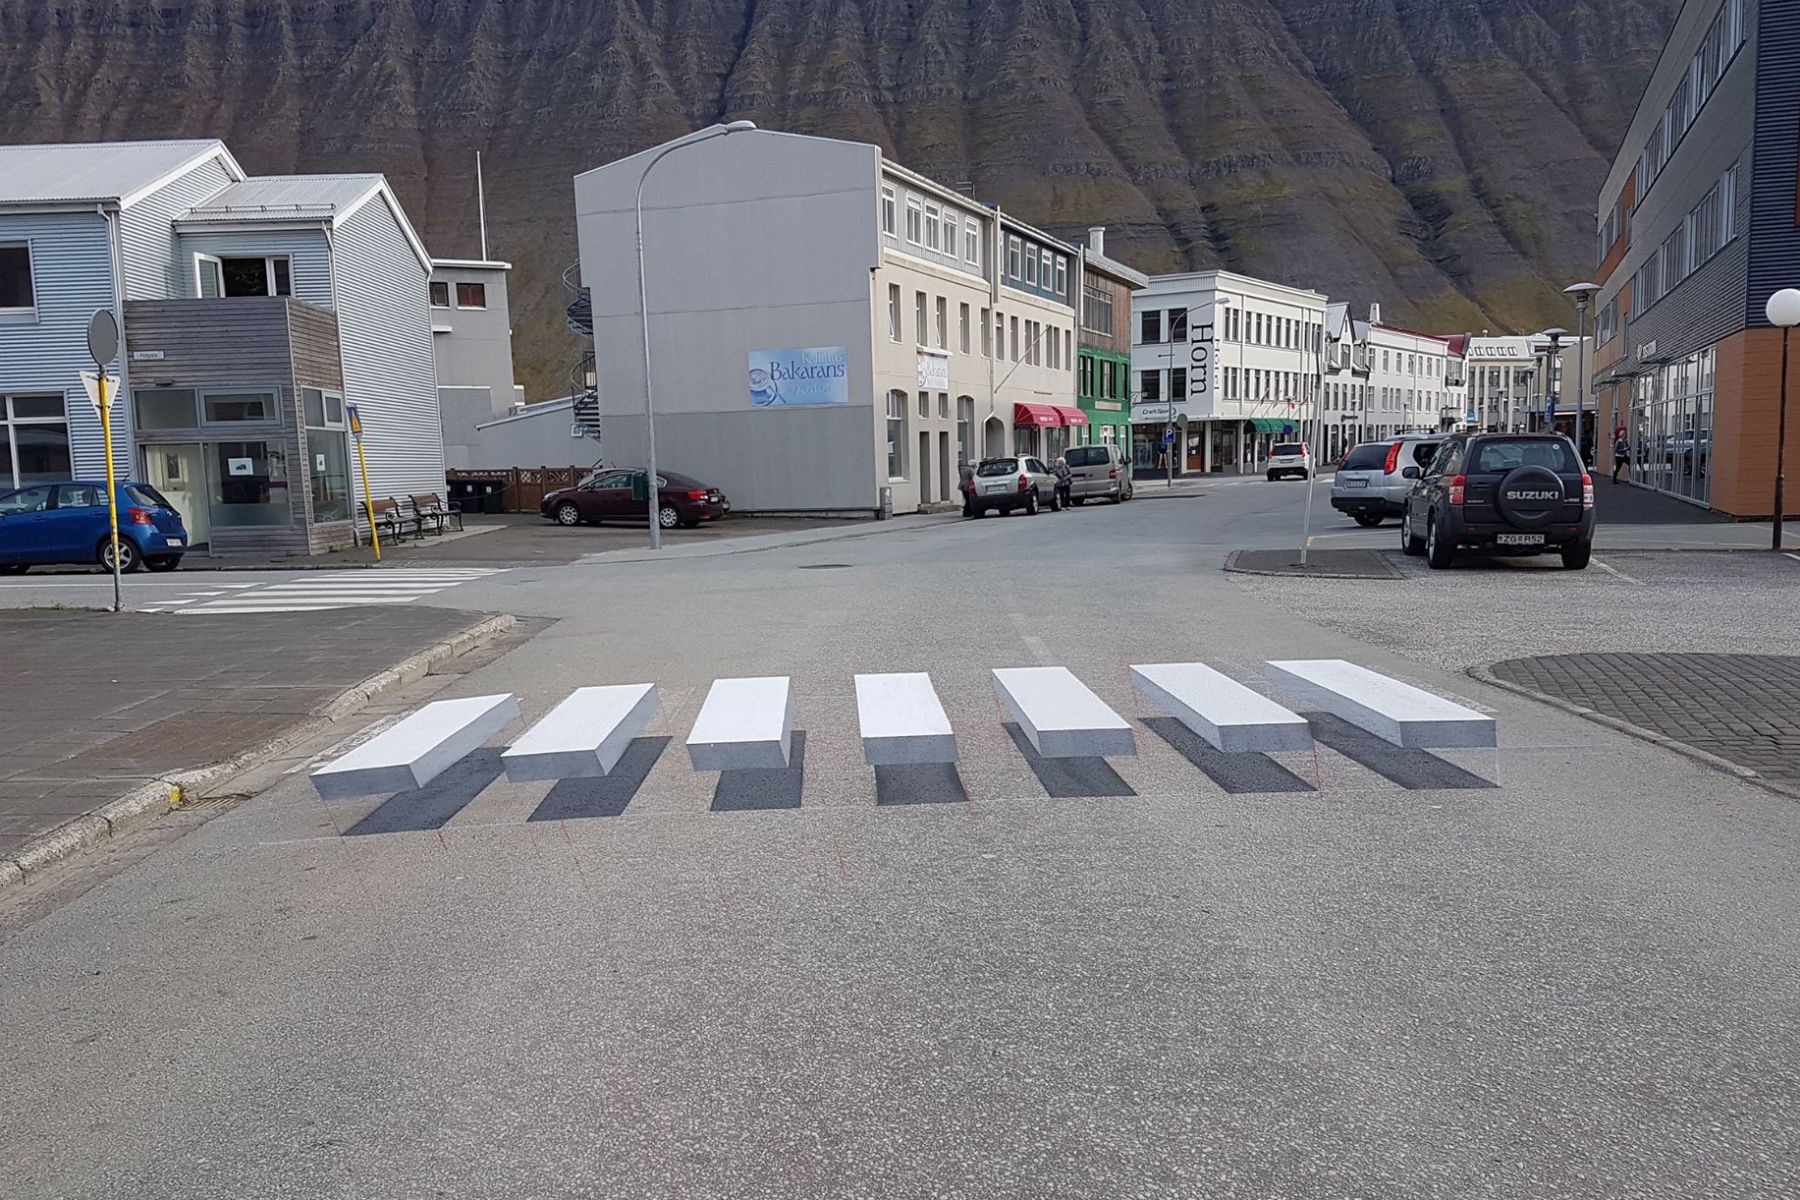 3D zebra crossings are being trialled in Iceland